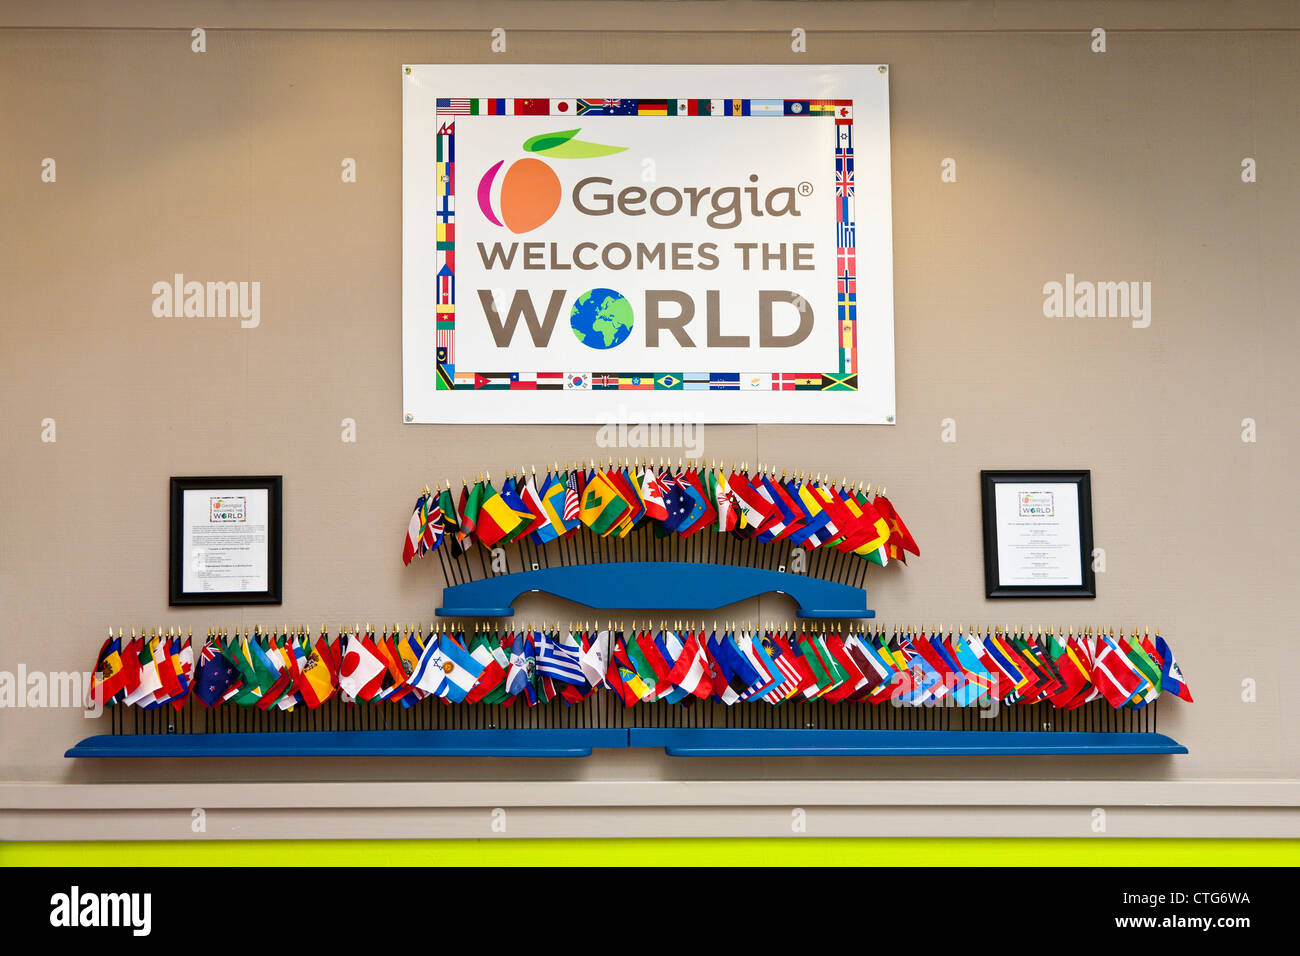 Display in Georgia State Welcome Center welcomes the world to Georgia Stock Photo